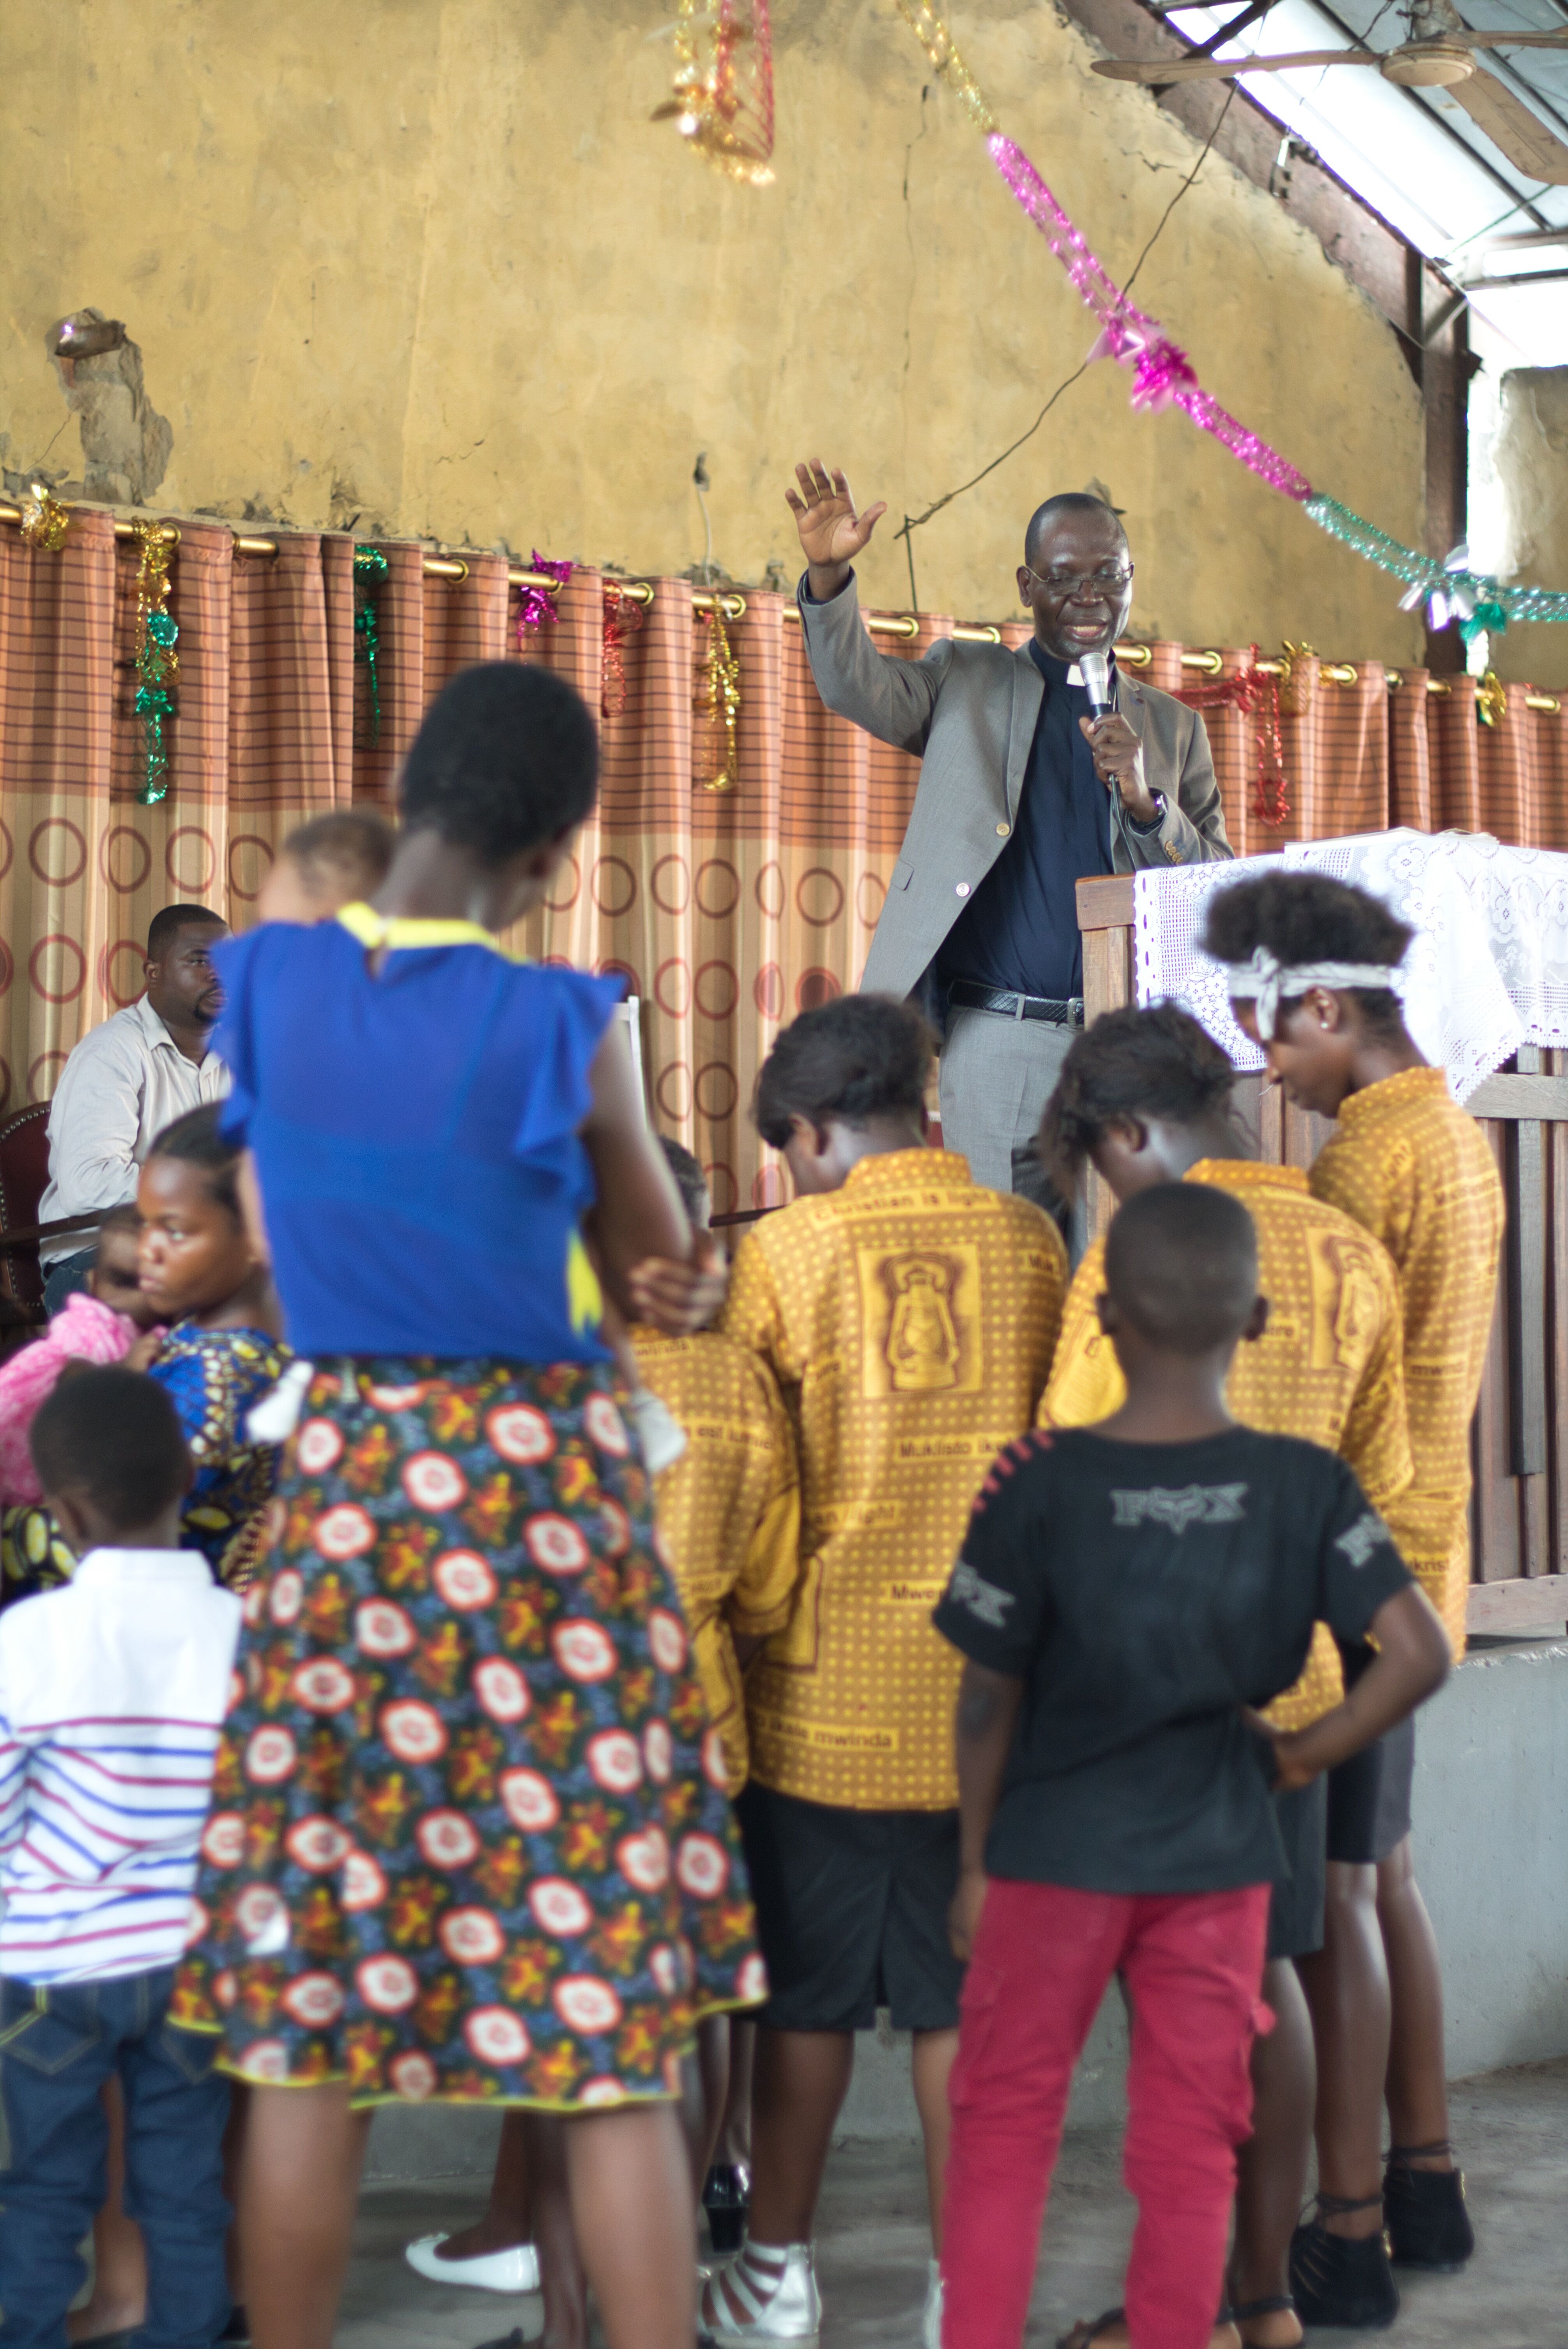 Mindful of end-of-the-school-year exams, Pastor Isaac blesses children during worship service.